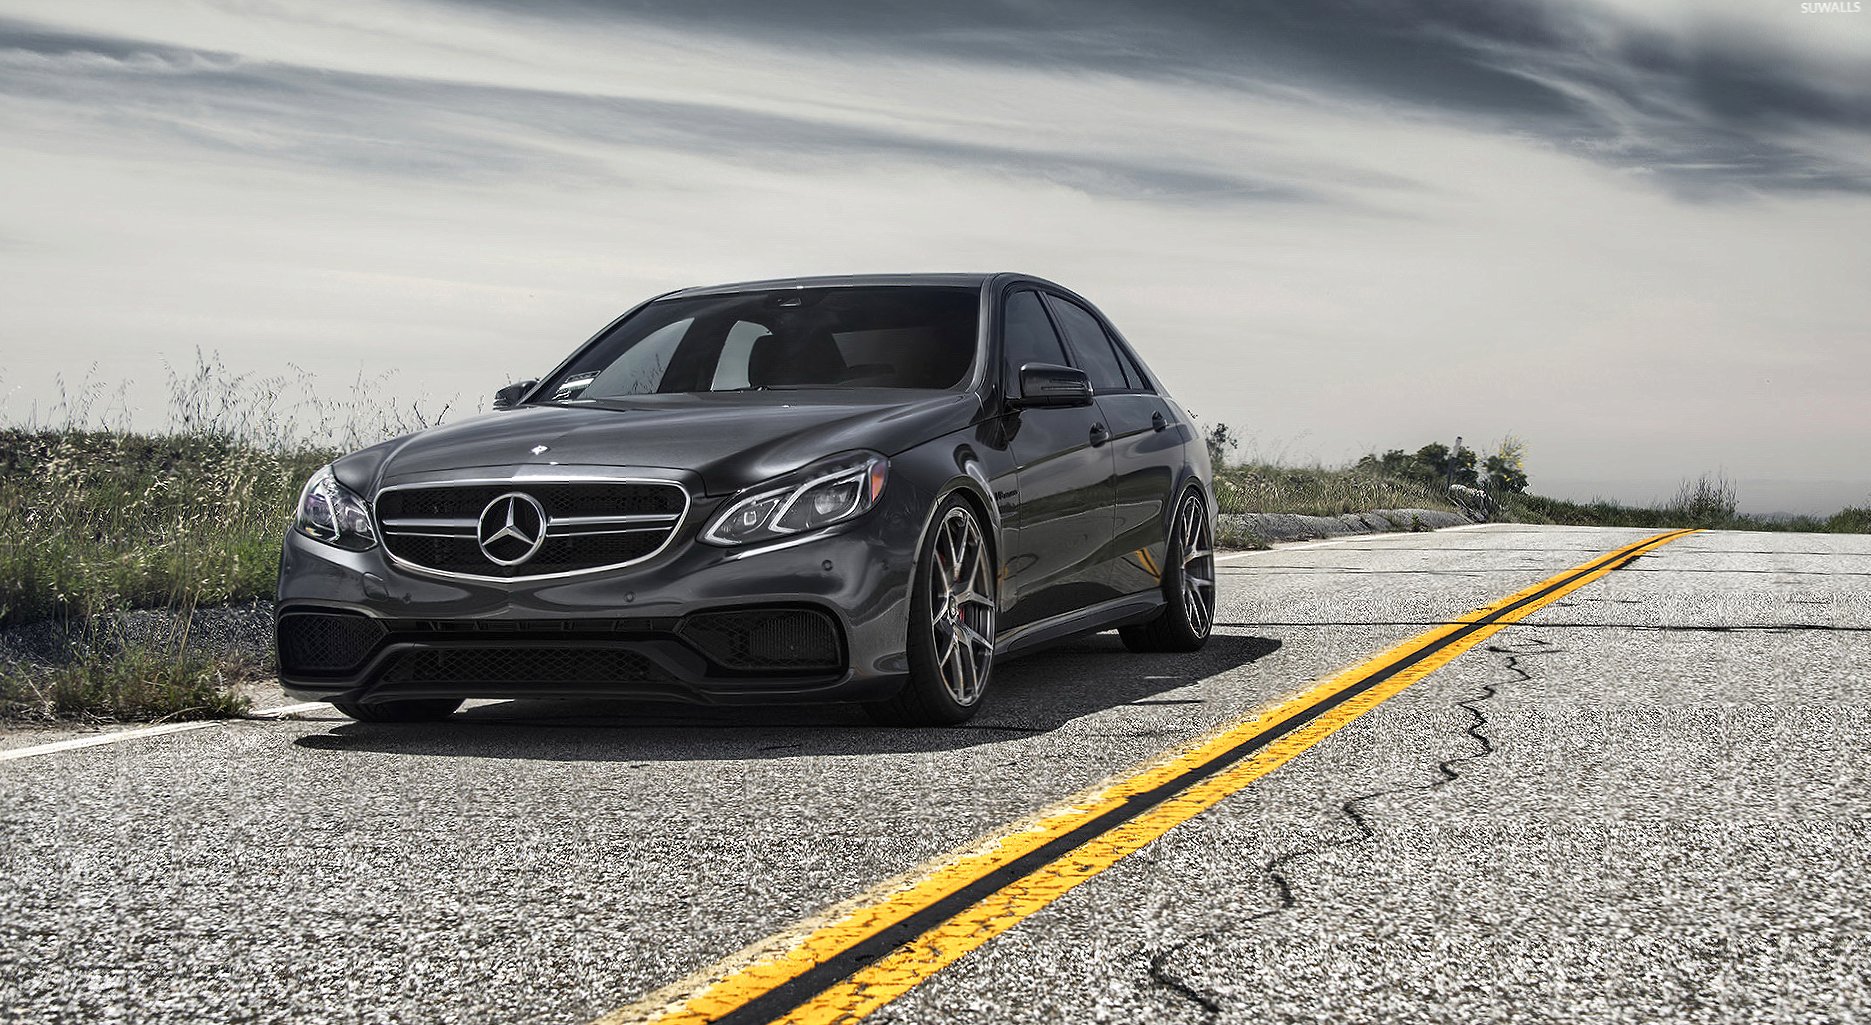 2014 Black Mercedes-Benz E-Class front view wallpapers HD quality